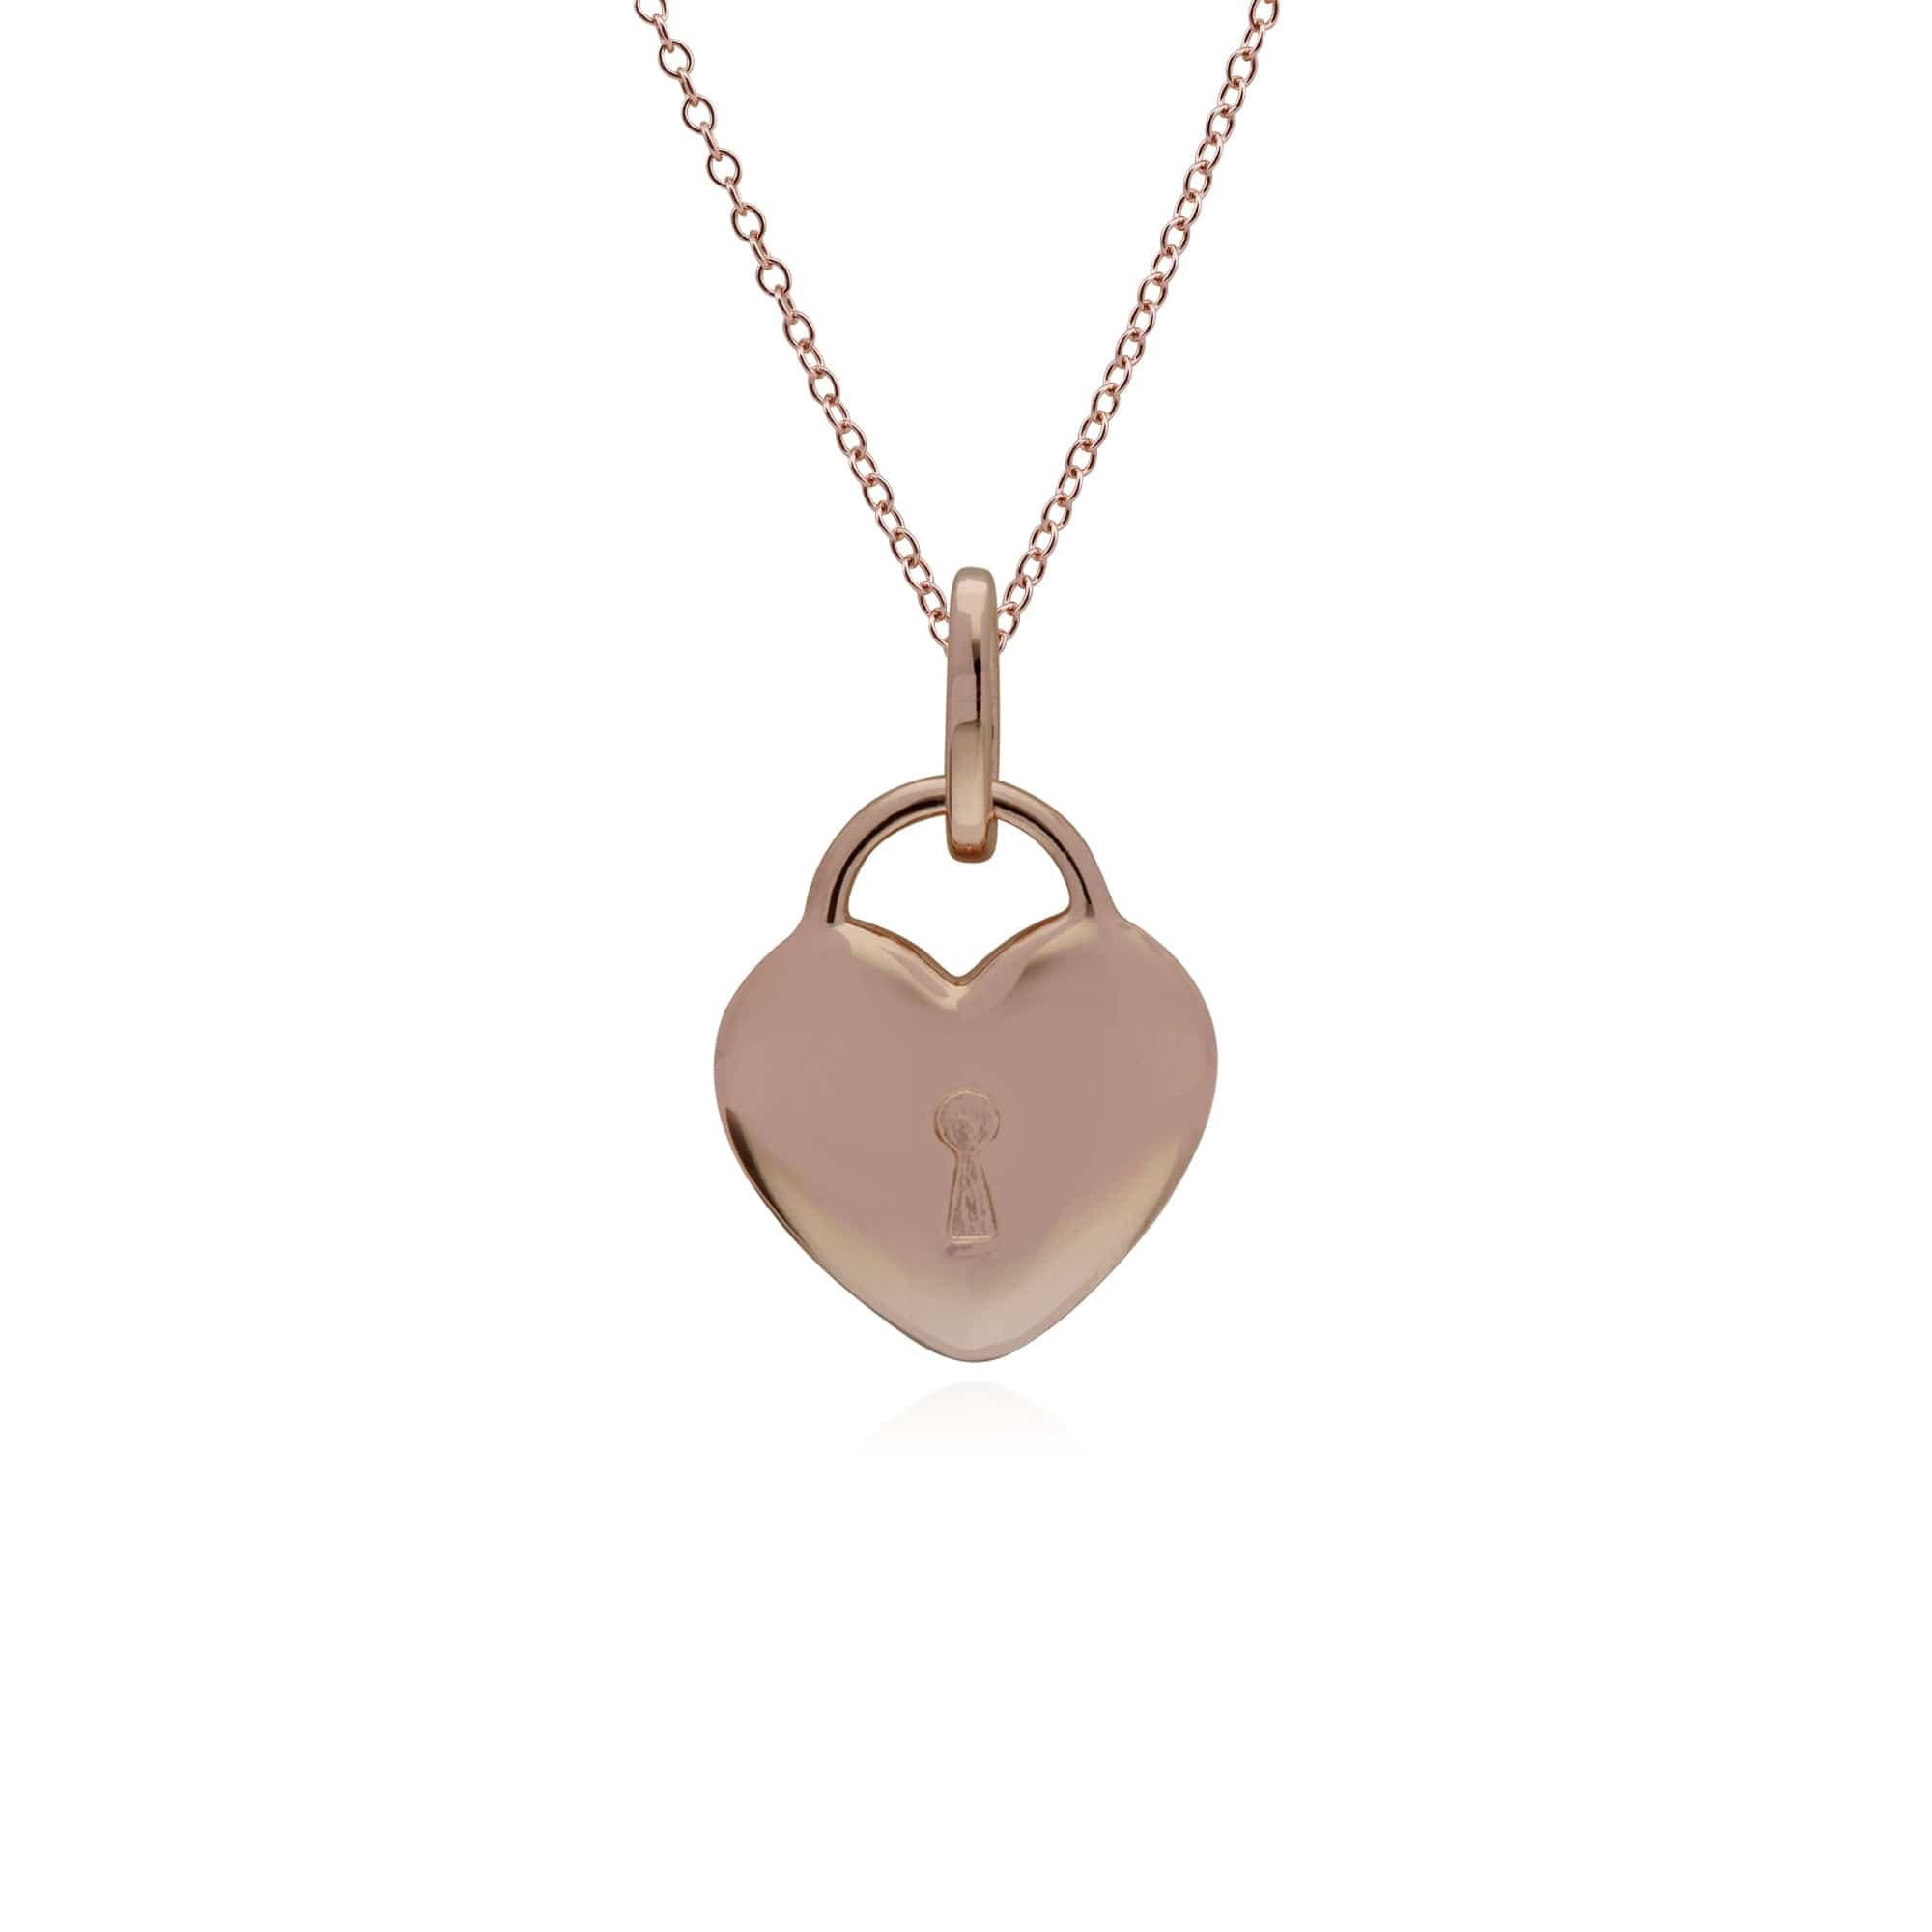 270P027304925-270P026901925 Classic Heart Lock Pendant & Garnet Charm in Rose Gold Plated 925 Sterling Silver 3